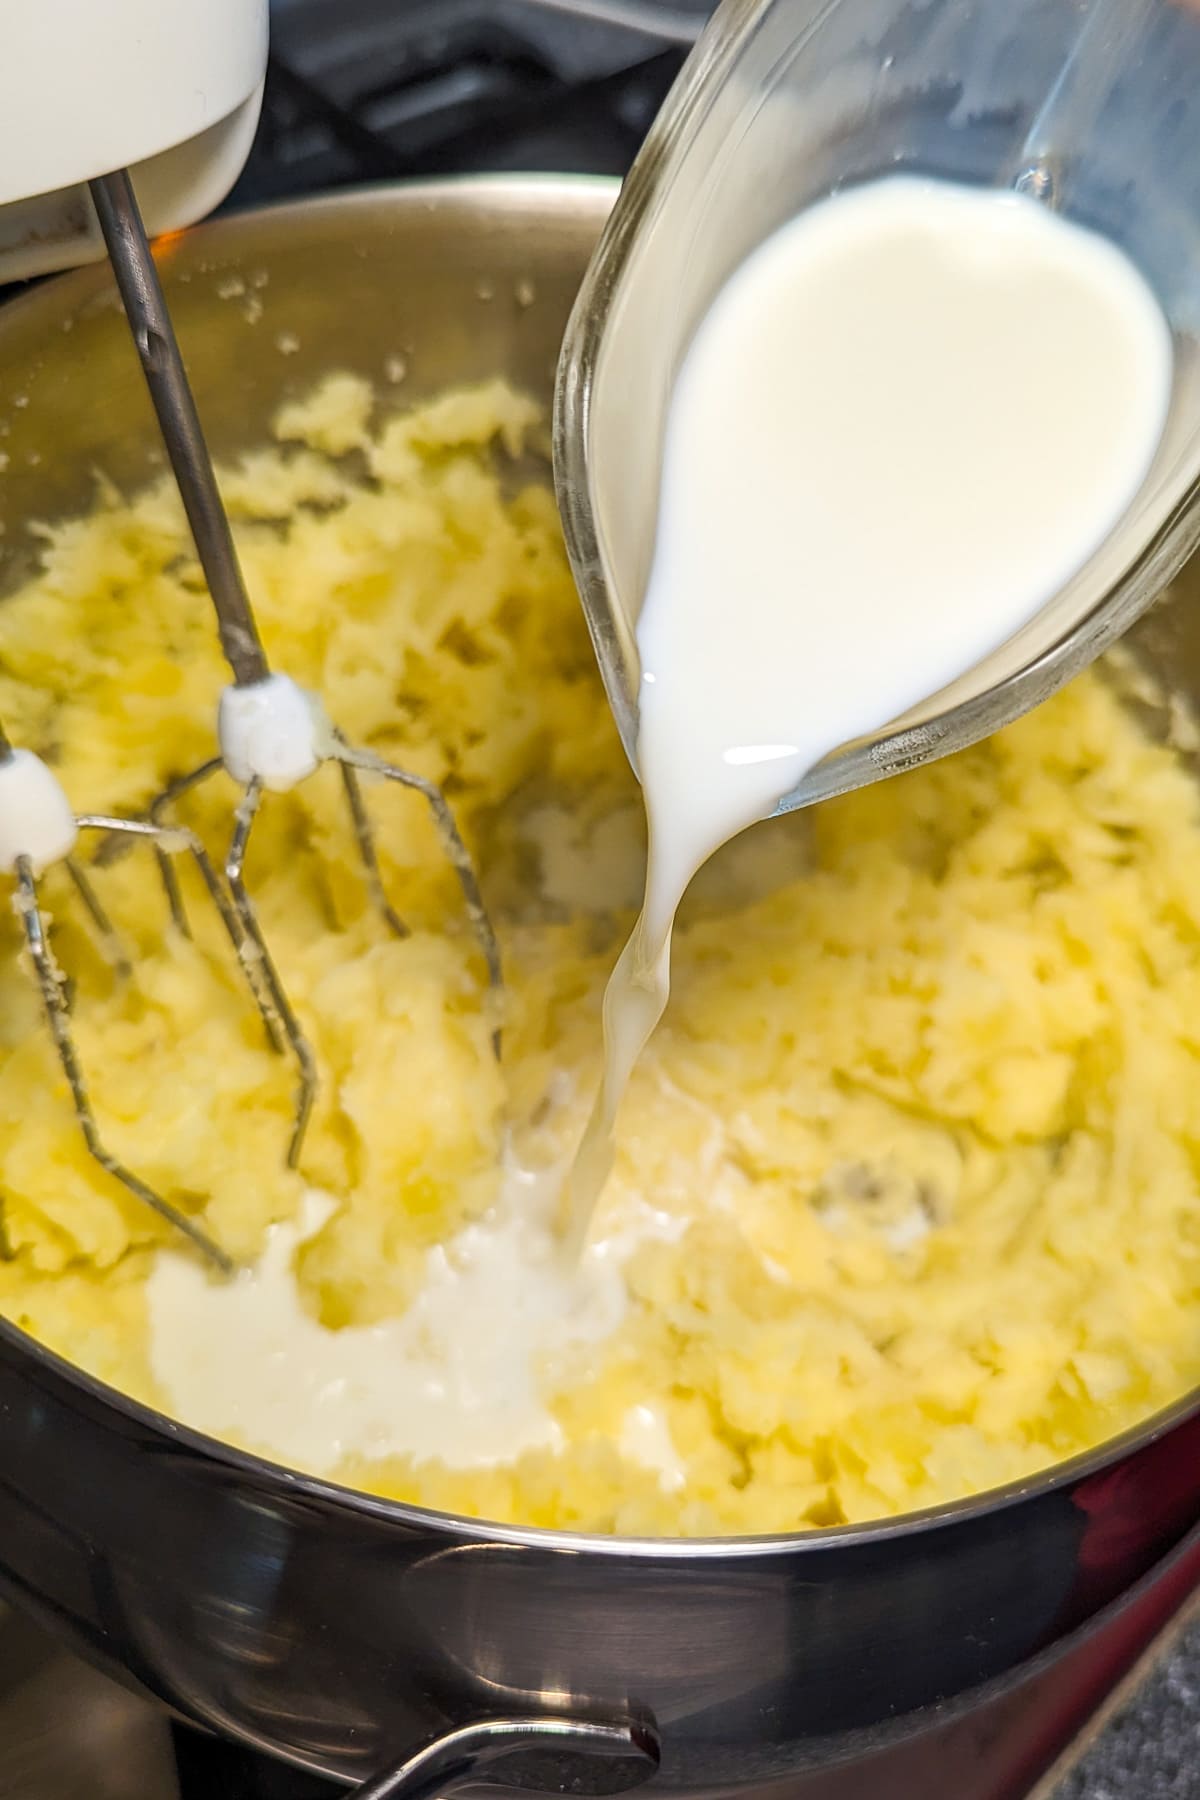 Pouring waster over mashed potatoes in a pan on the stove.